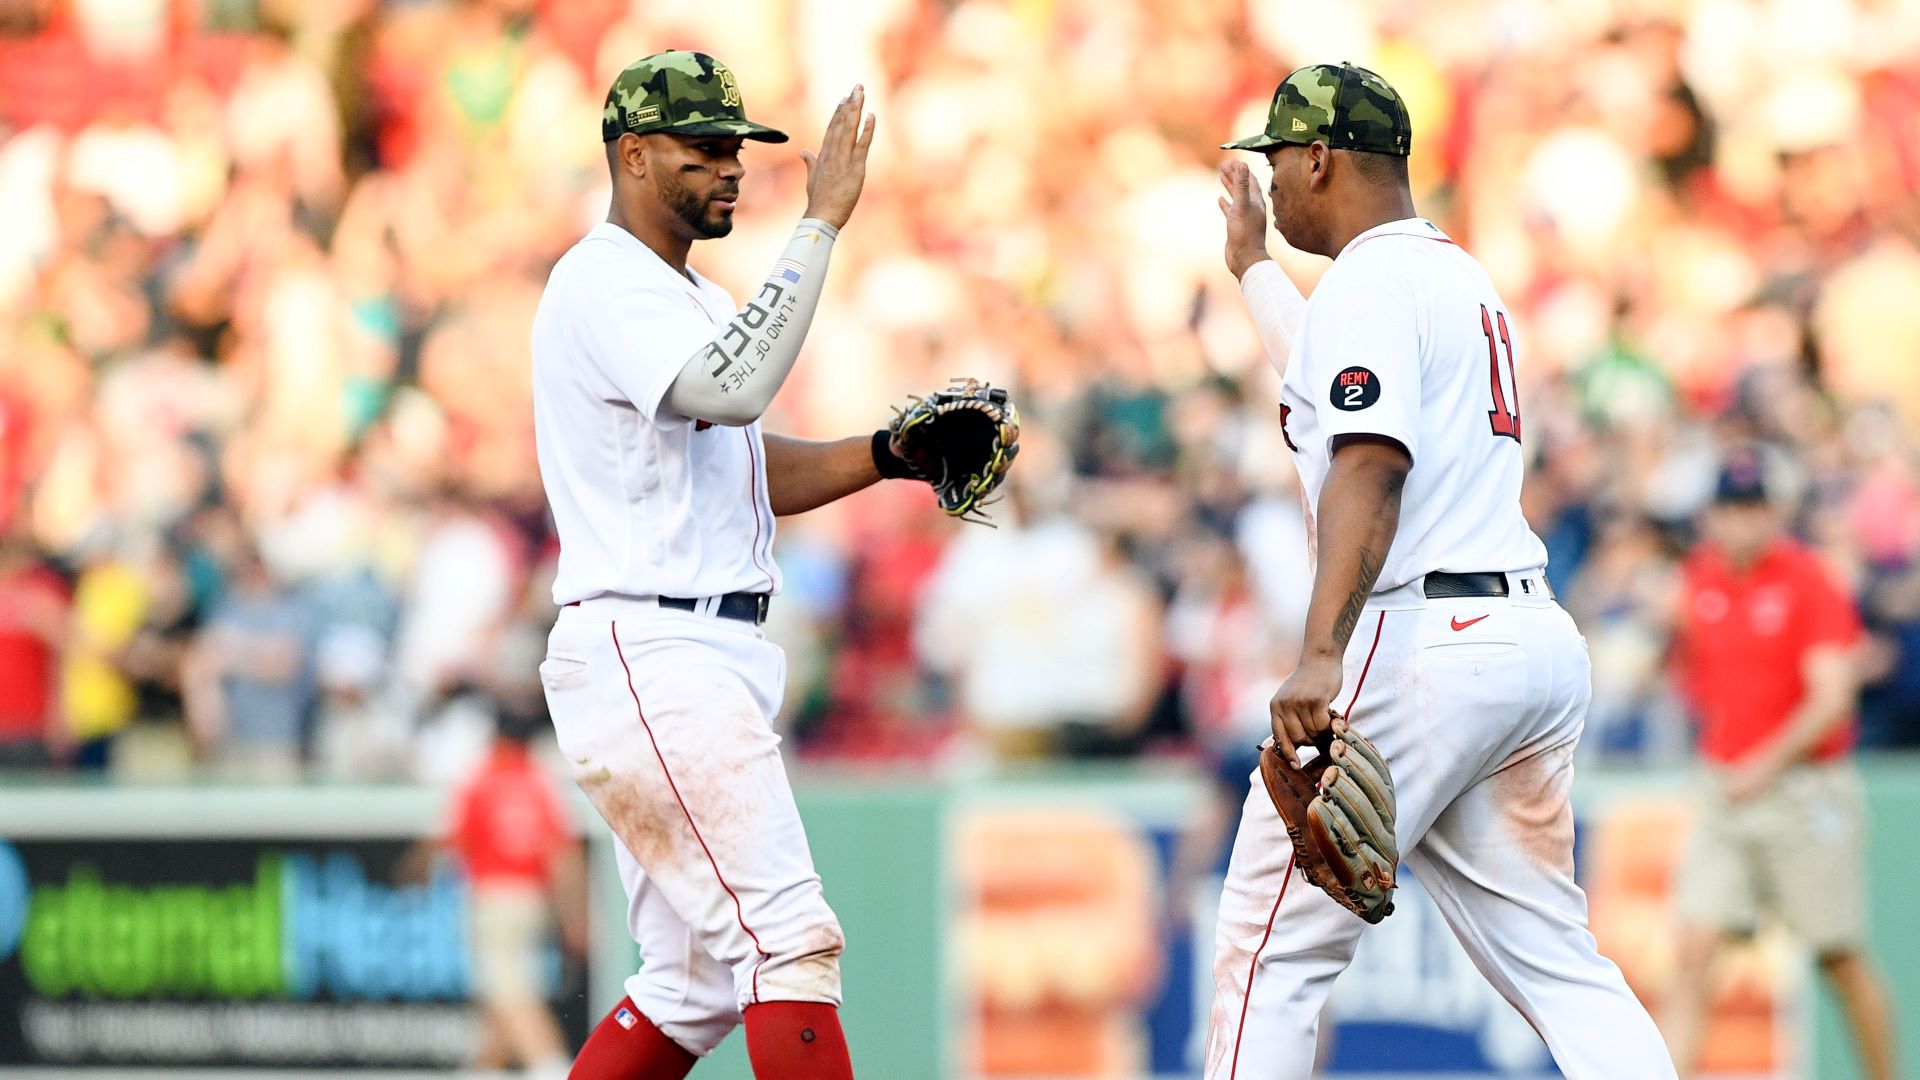 Red Sox prospect Rafael Devers showing off a bright future - The